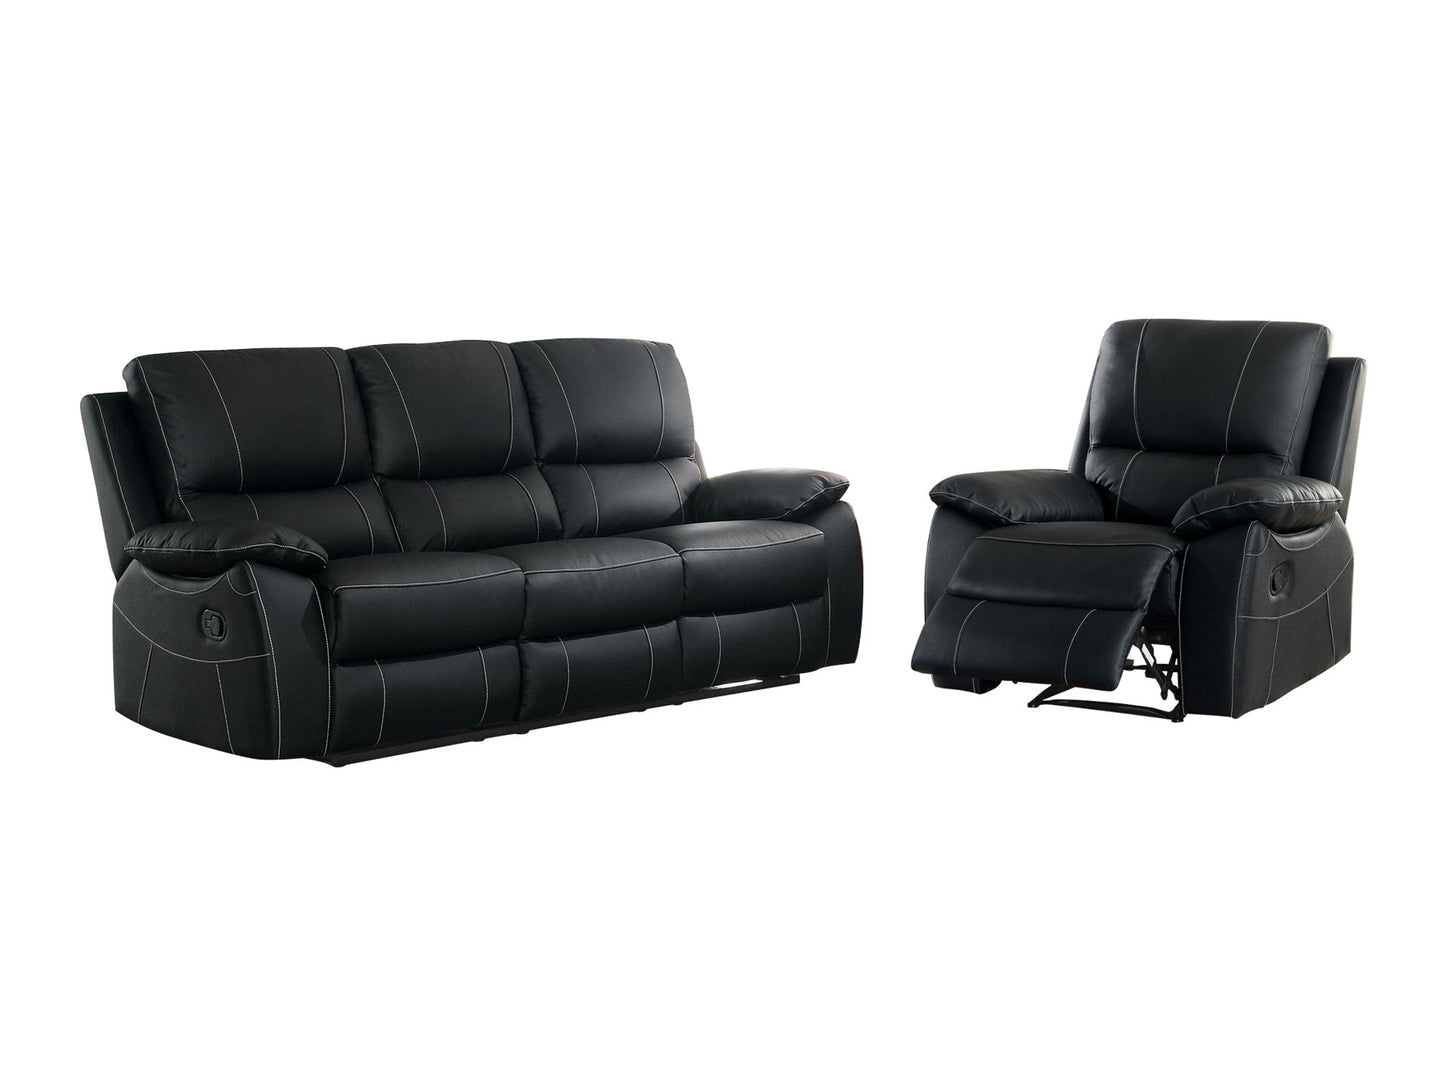 Homelegance Greeley 2PC Double Reclining Love Seat & Recliner Chair in Black Leather